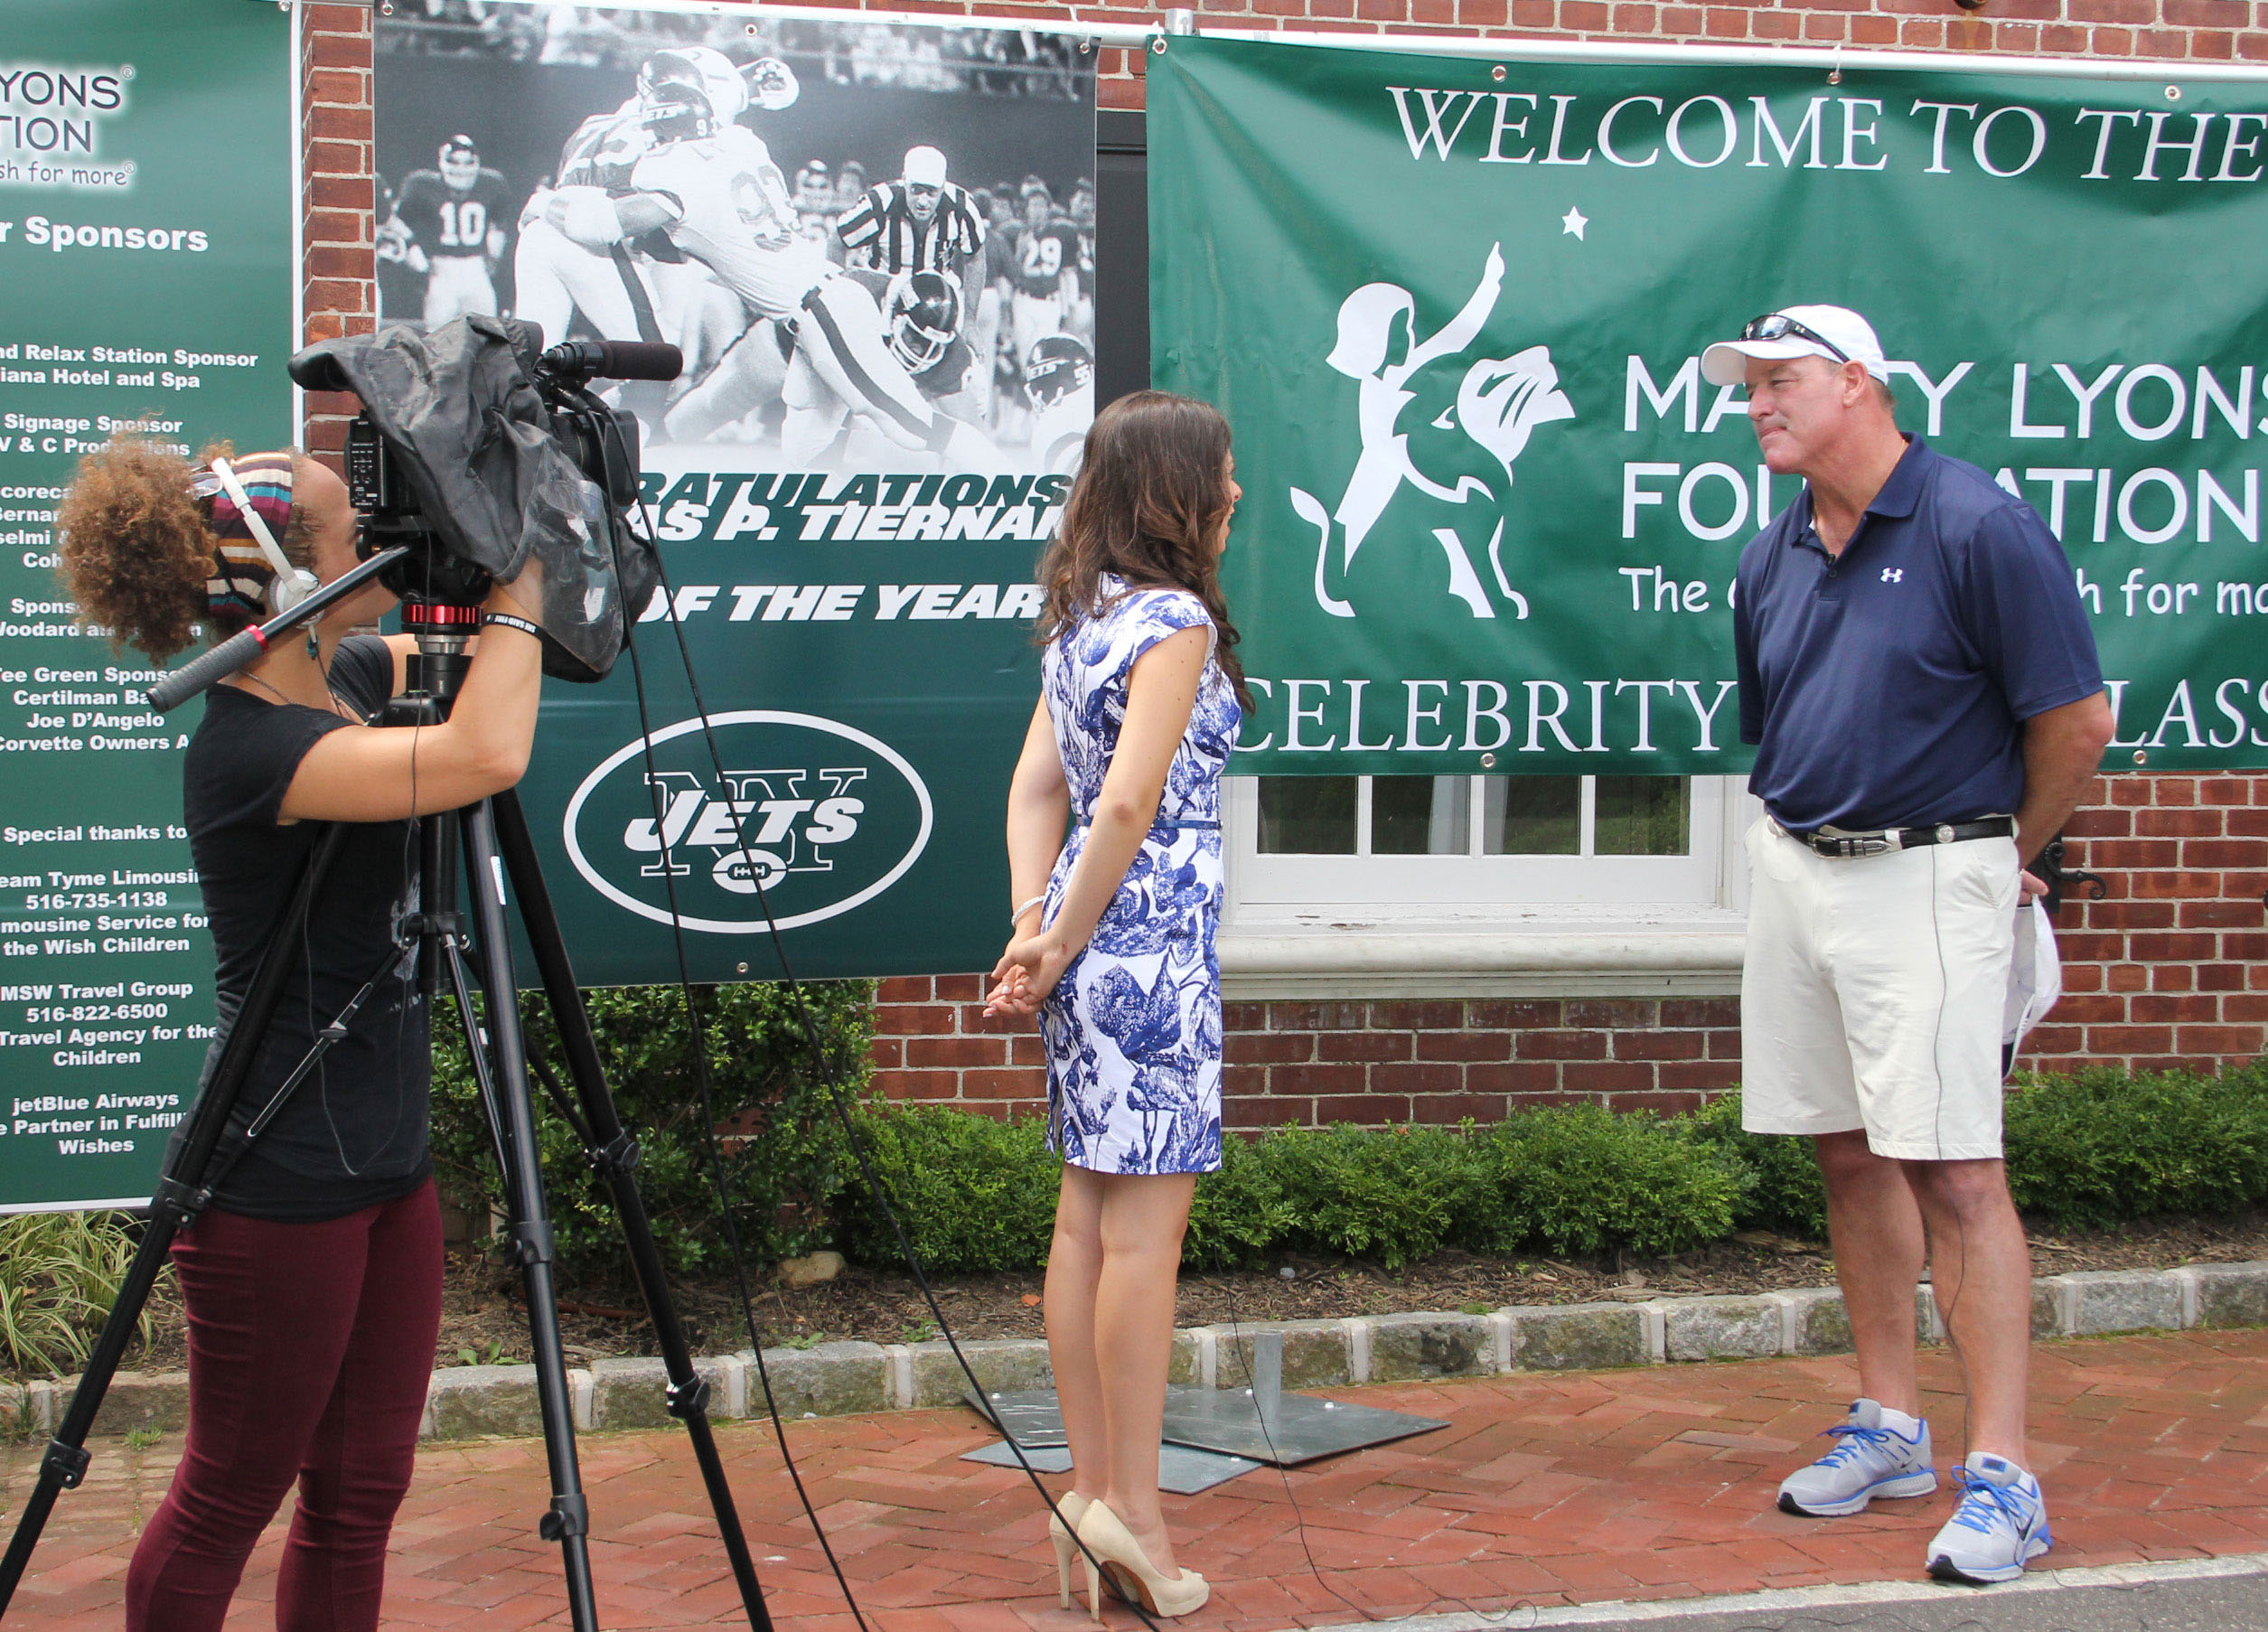 Corbett Public Relations client Marty Lyons of the Marty Lyons Foundations was interviewed by FiOS1's Jessica Fragoso for the 